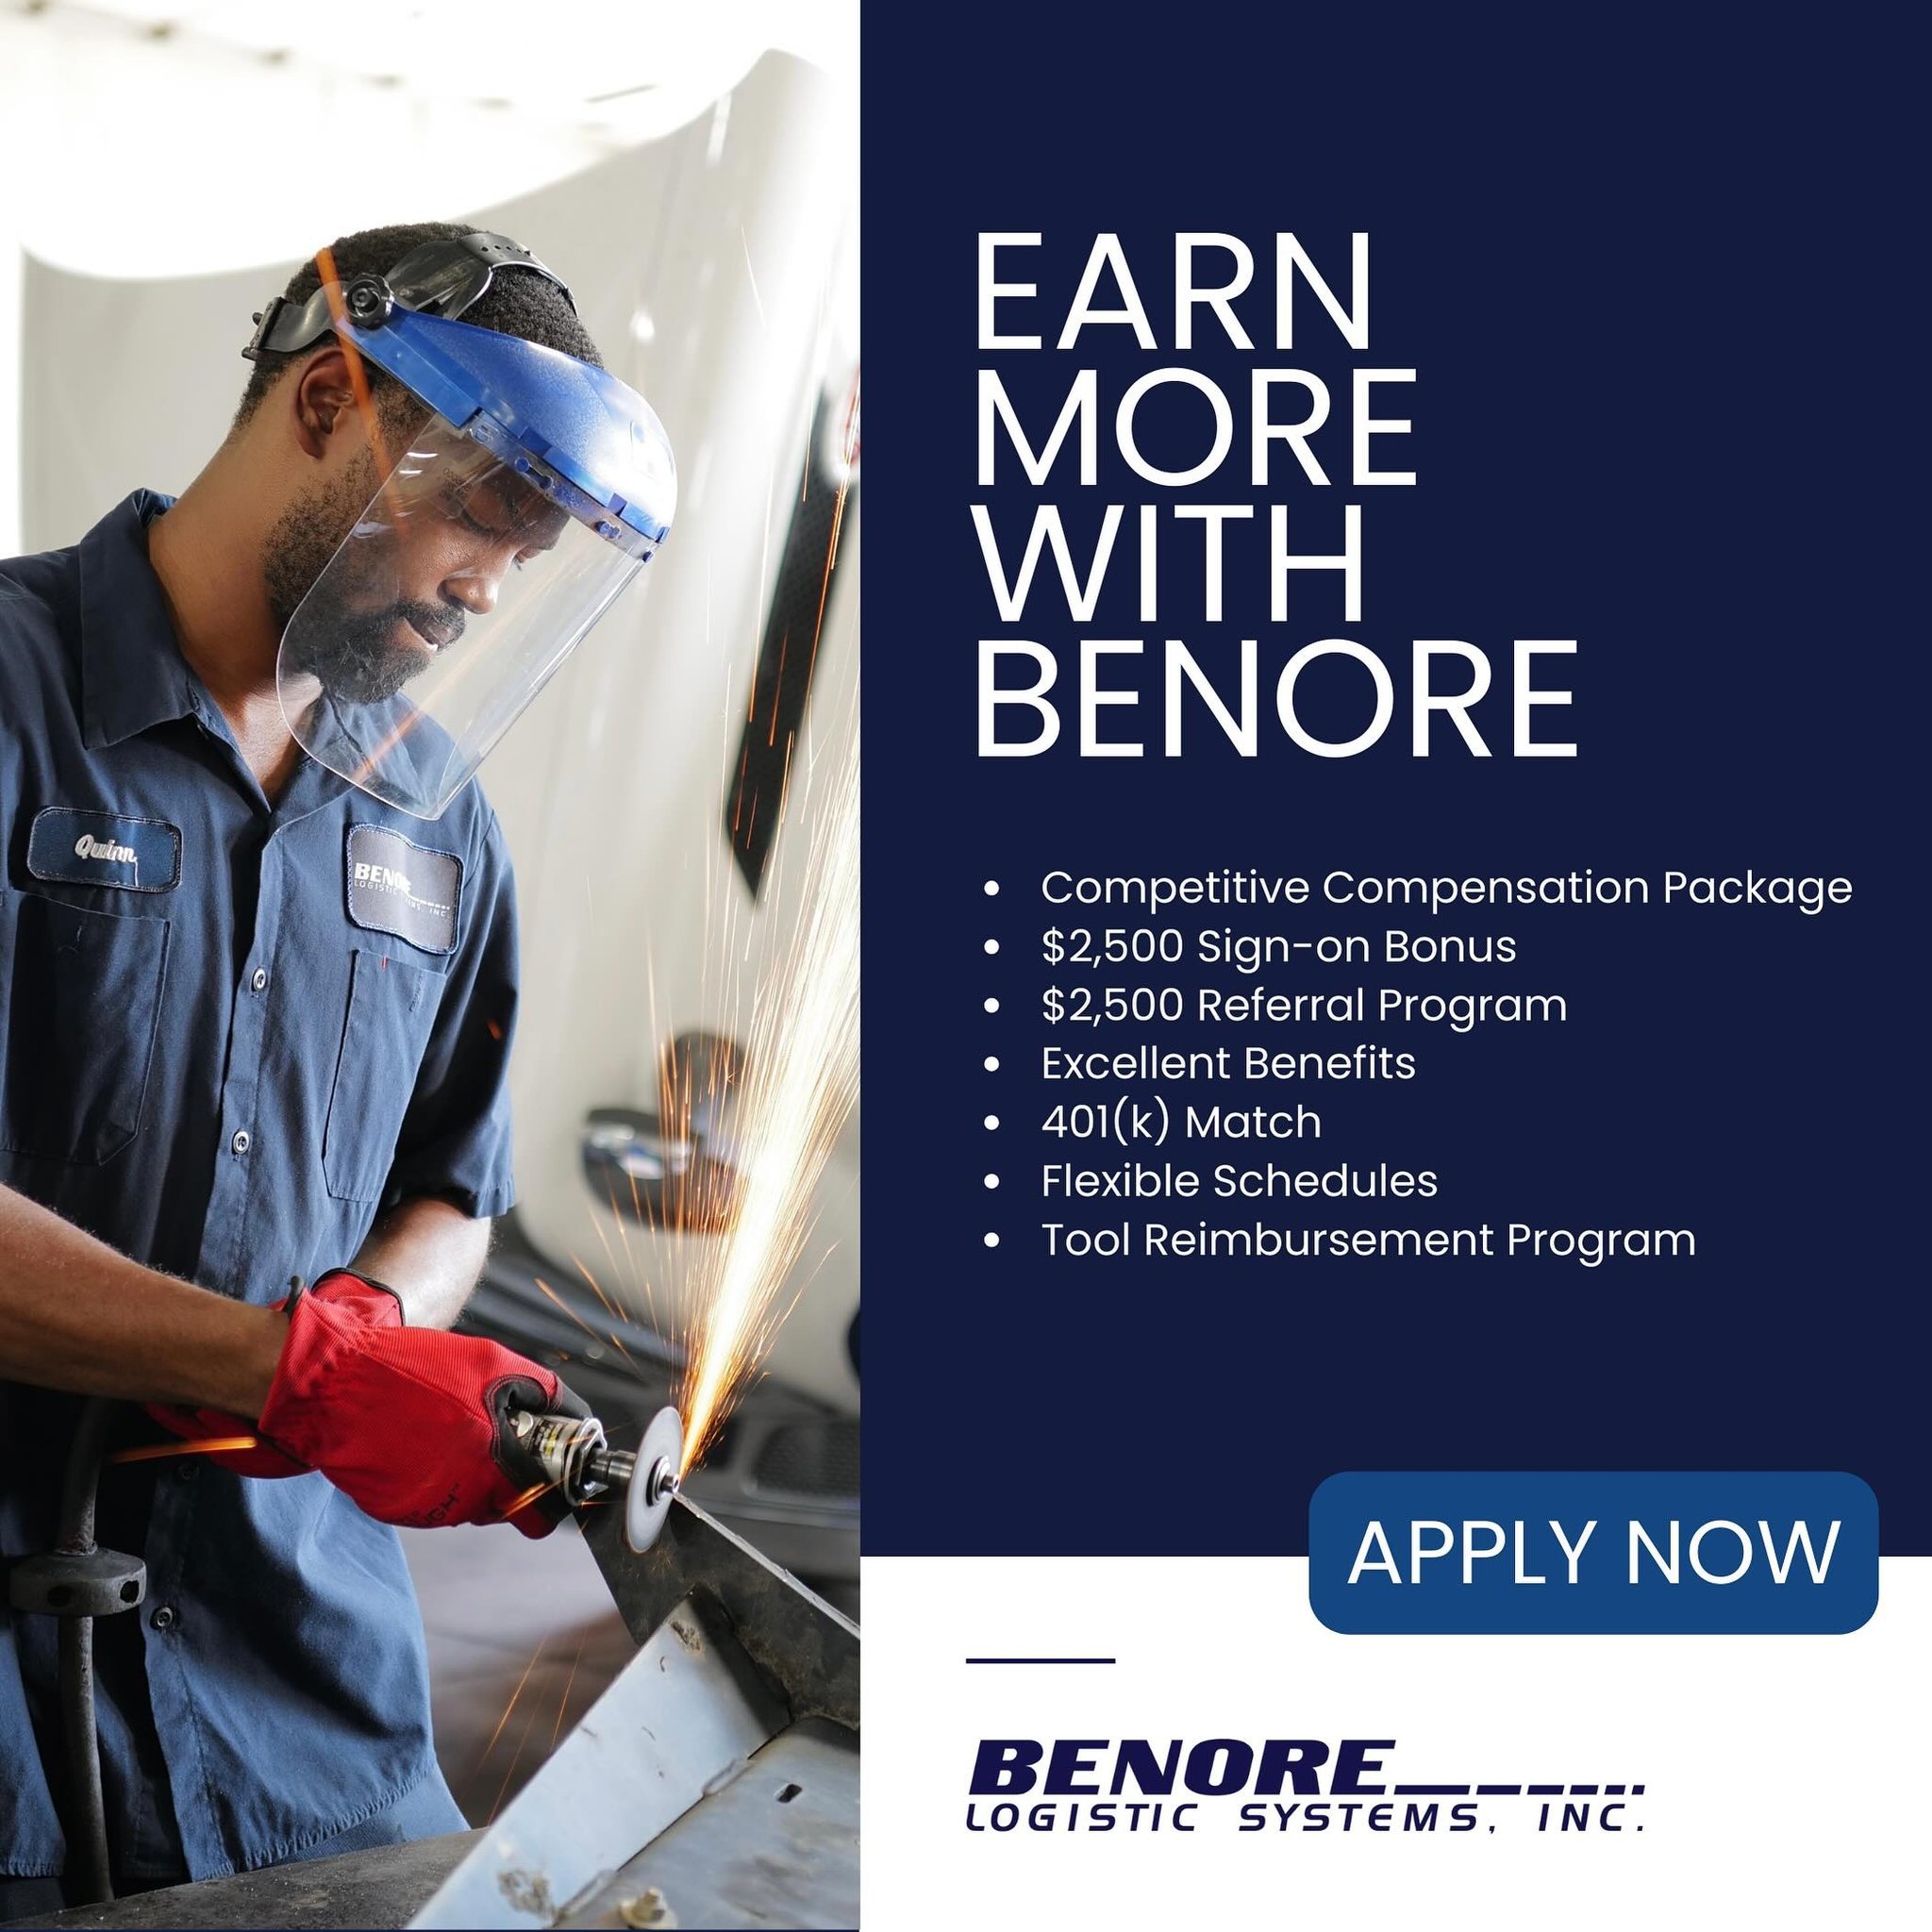 Become a part of our Maintenance Team!

As a Diesel Technician, you&rsquo;ll diagnose, repair, and maintain our truck fleet, ensuring safety and efficiency on the road. 

Enjoy benefits like a $2,500 sign-on bonus, competitive compensation package (u